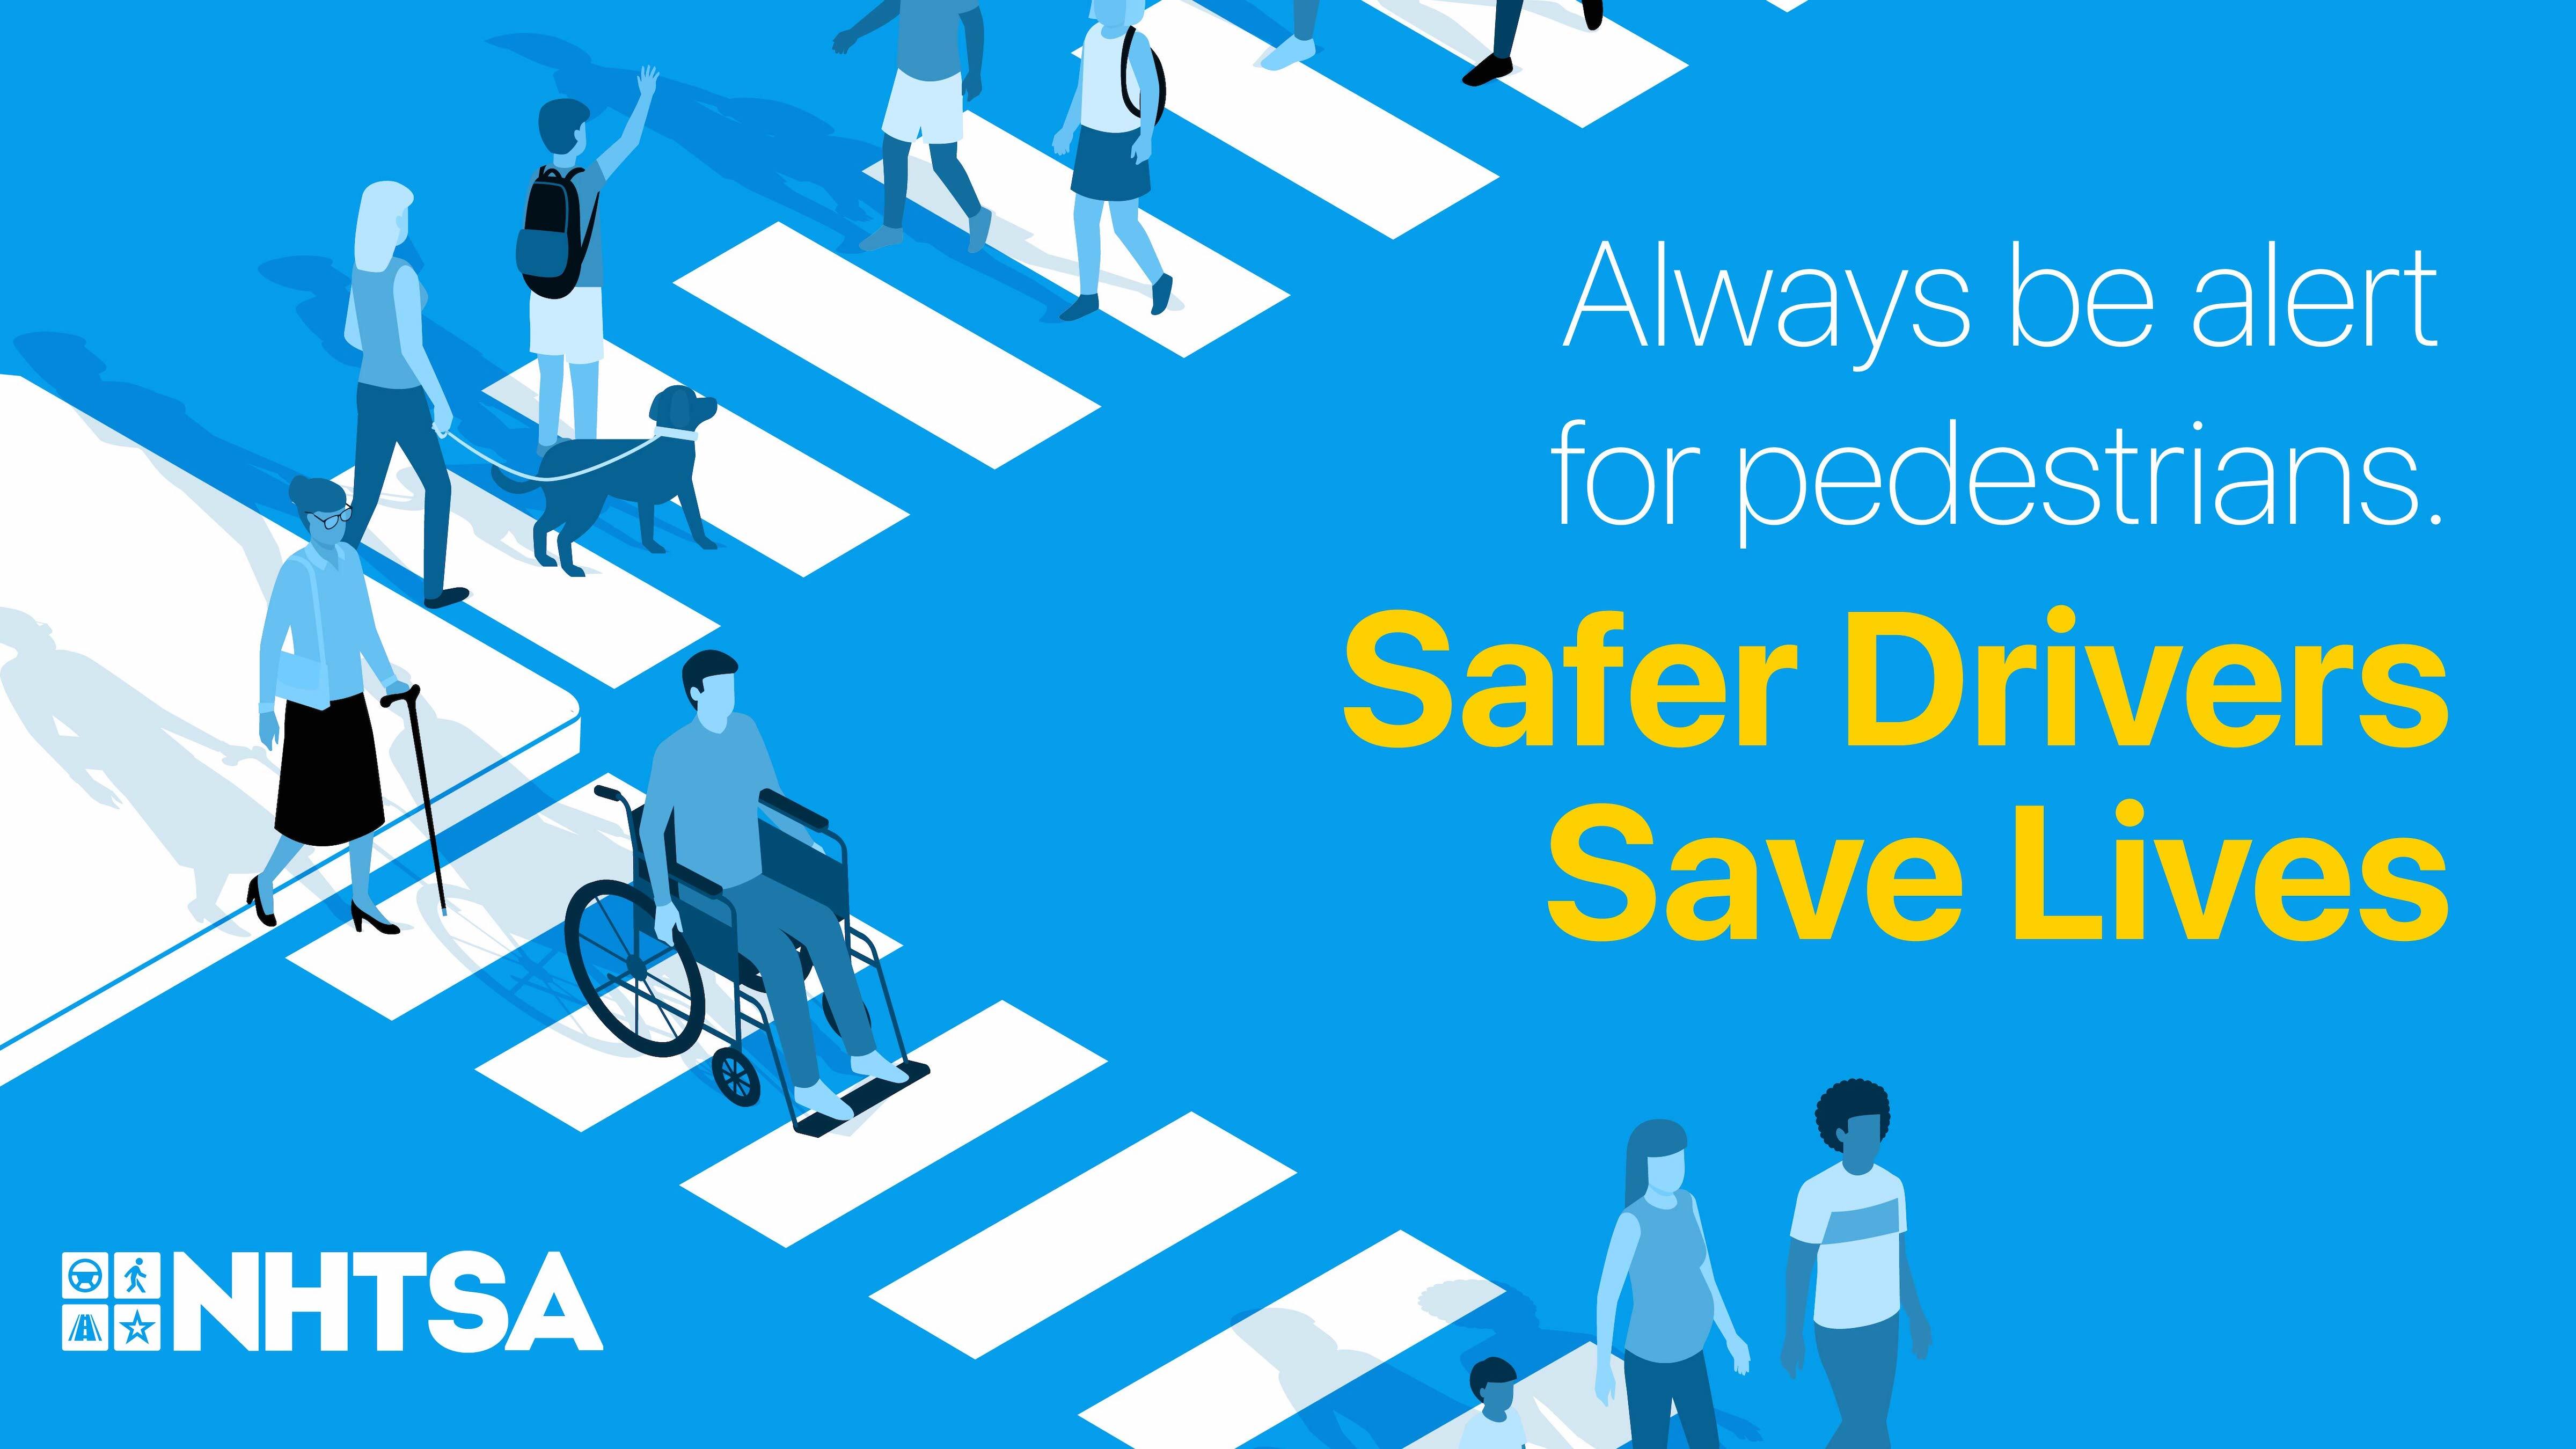 A graphic of people of all ages and abilities walking across two crosswalks. Text reads "Always be alert for pedestrians. Safer Drivers Save Lives."